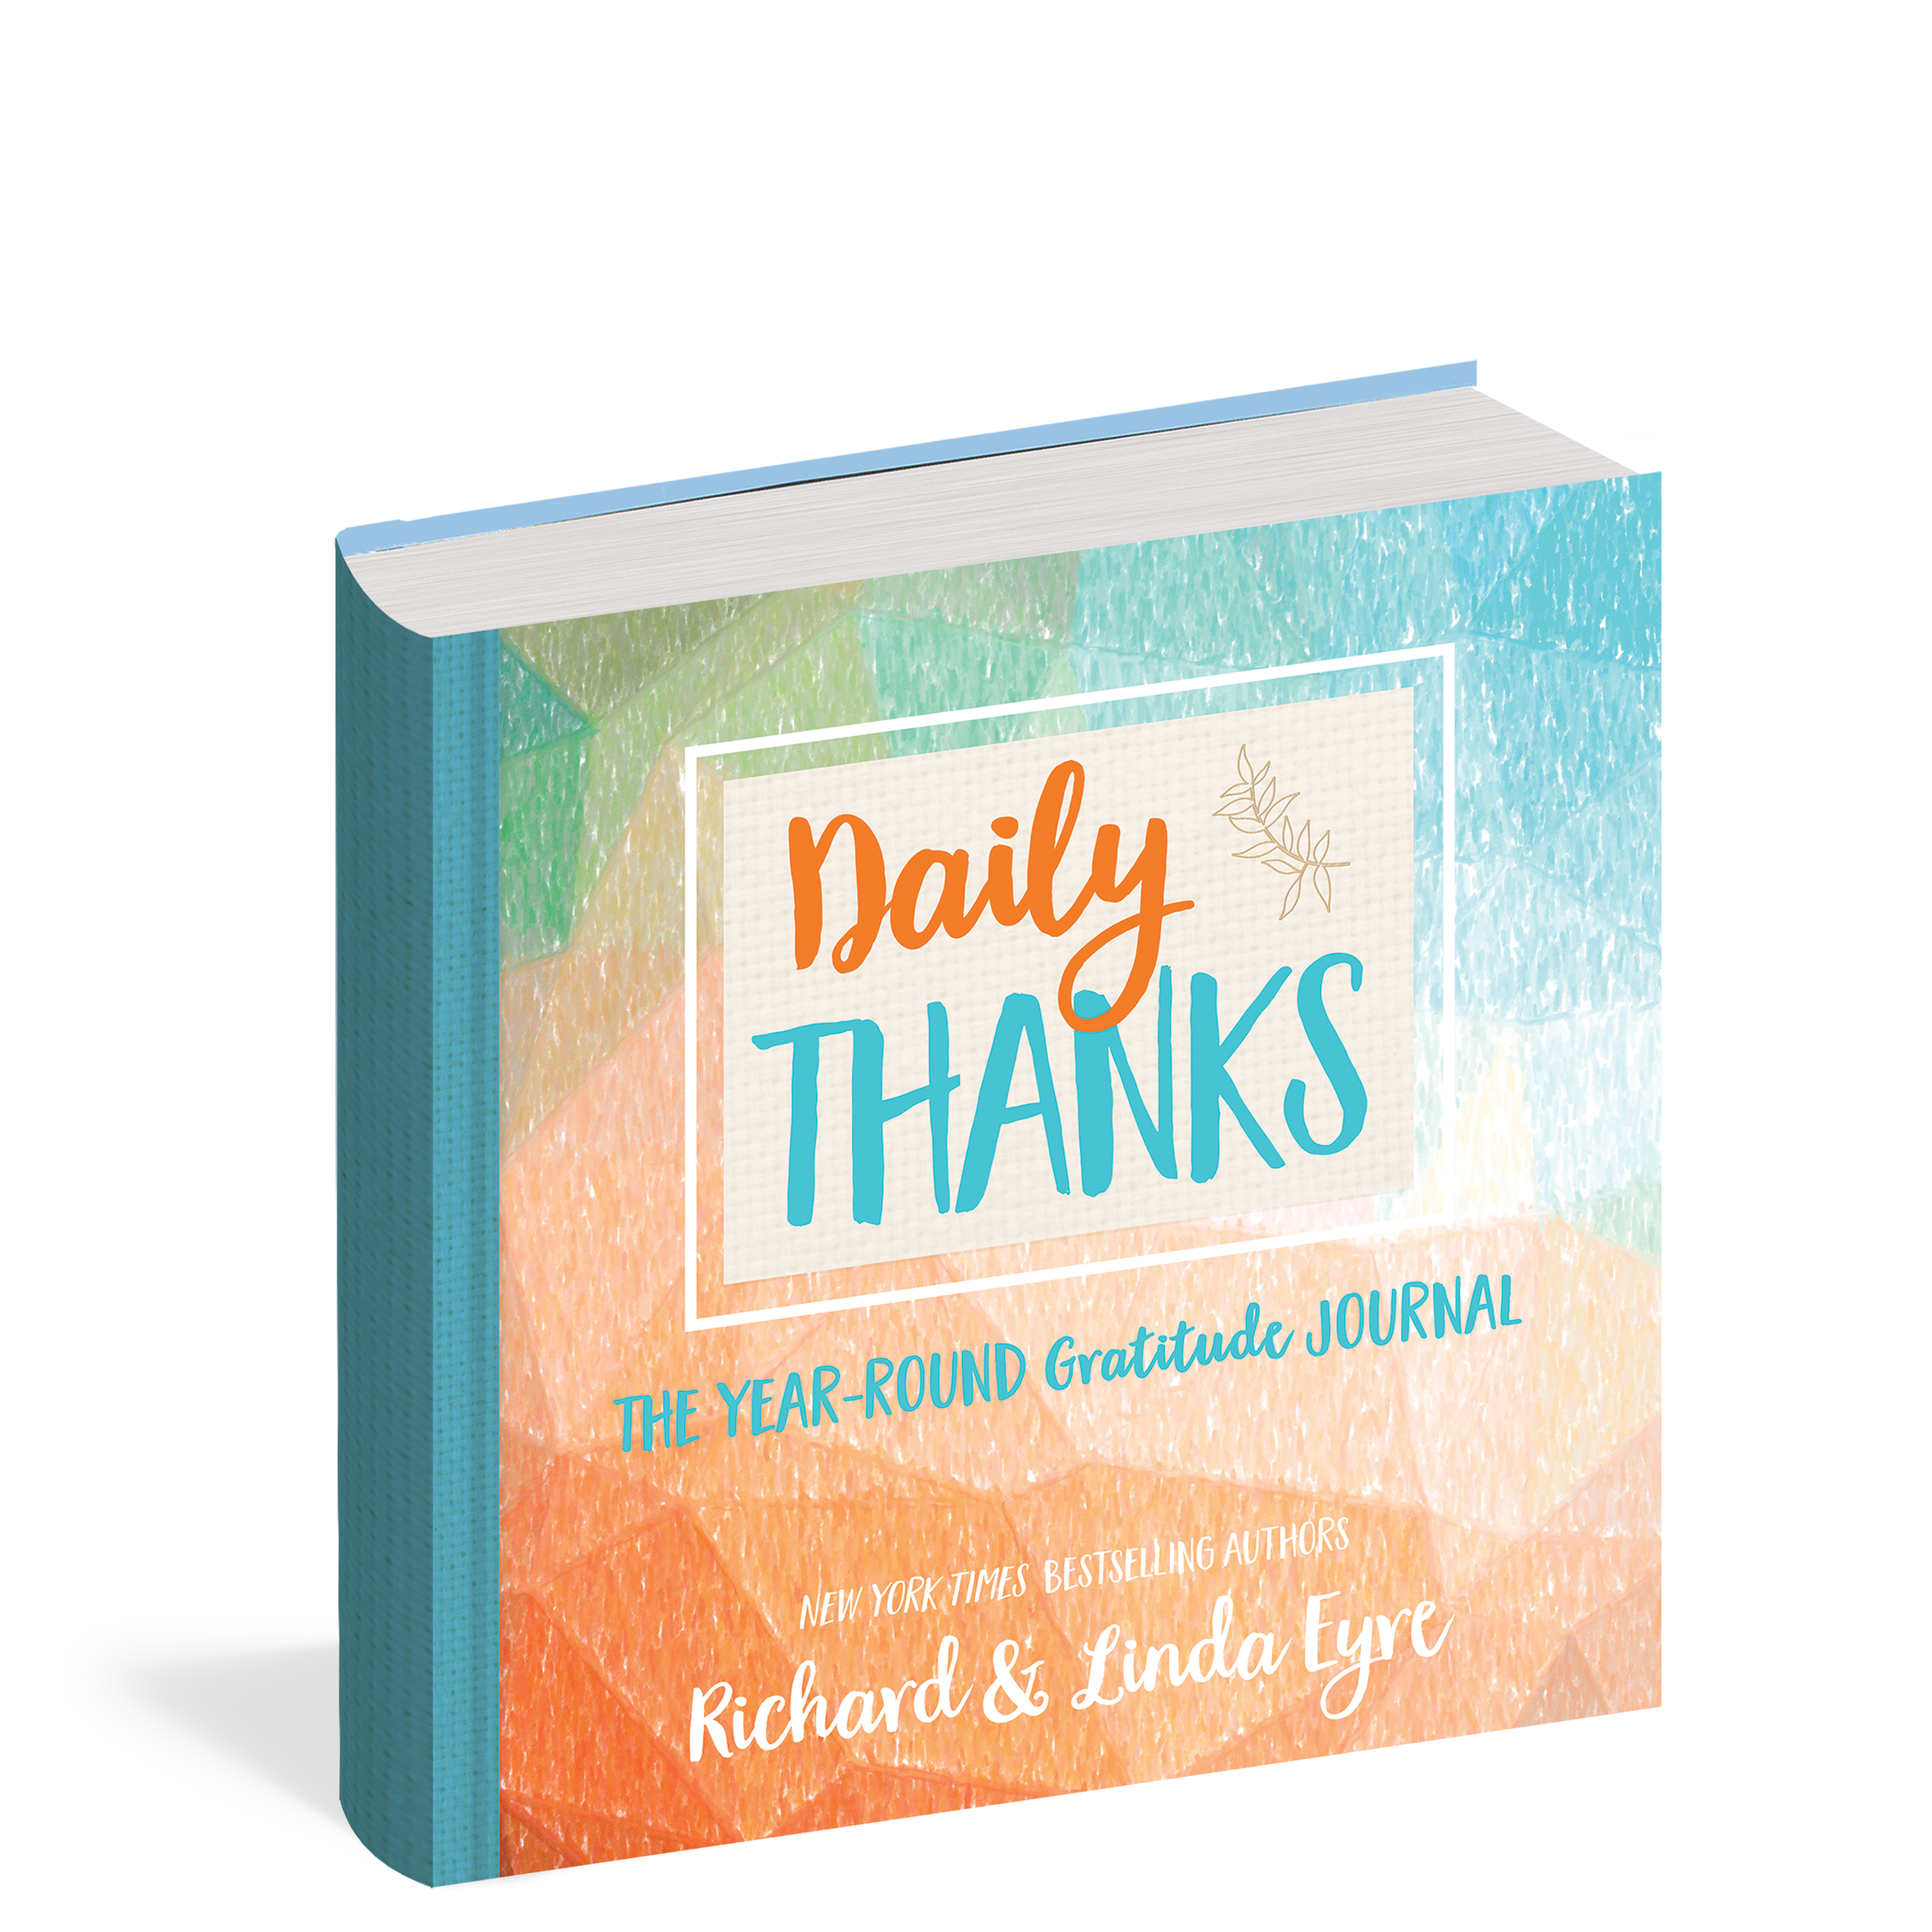 The cover of the gratitude journal Daily Thanks.